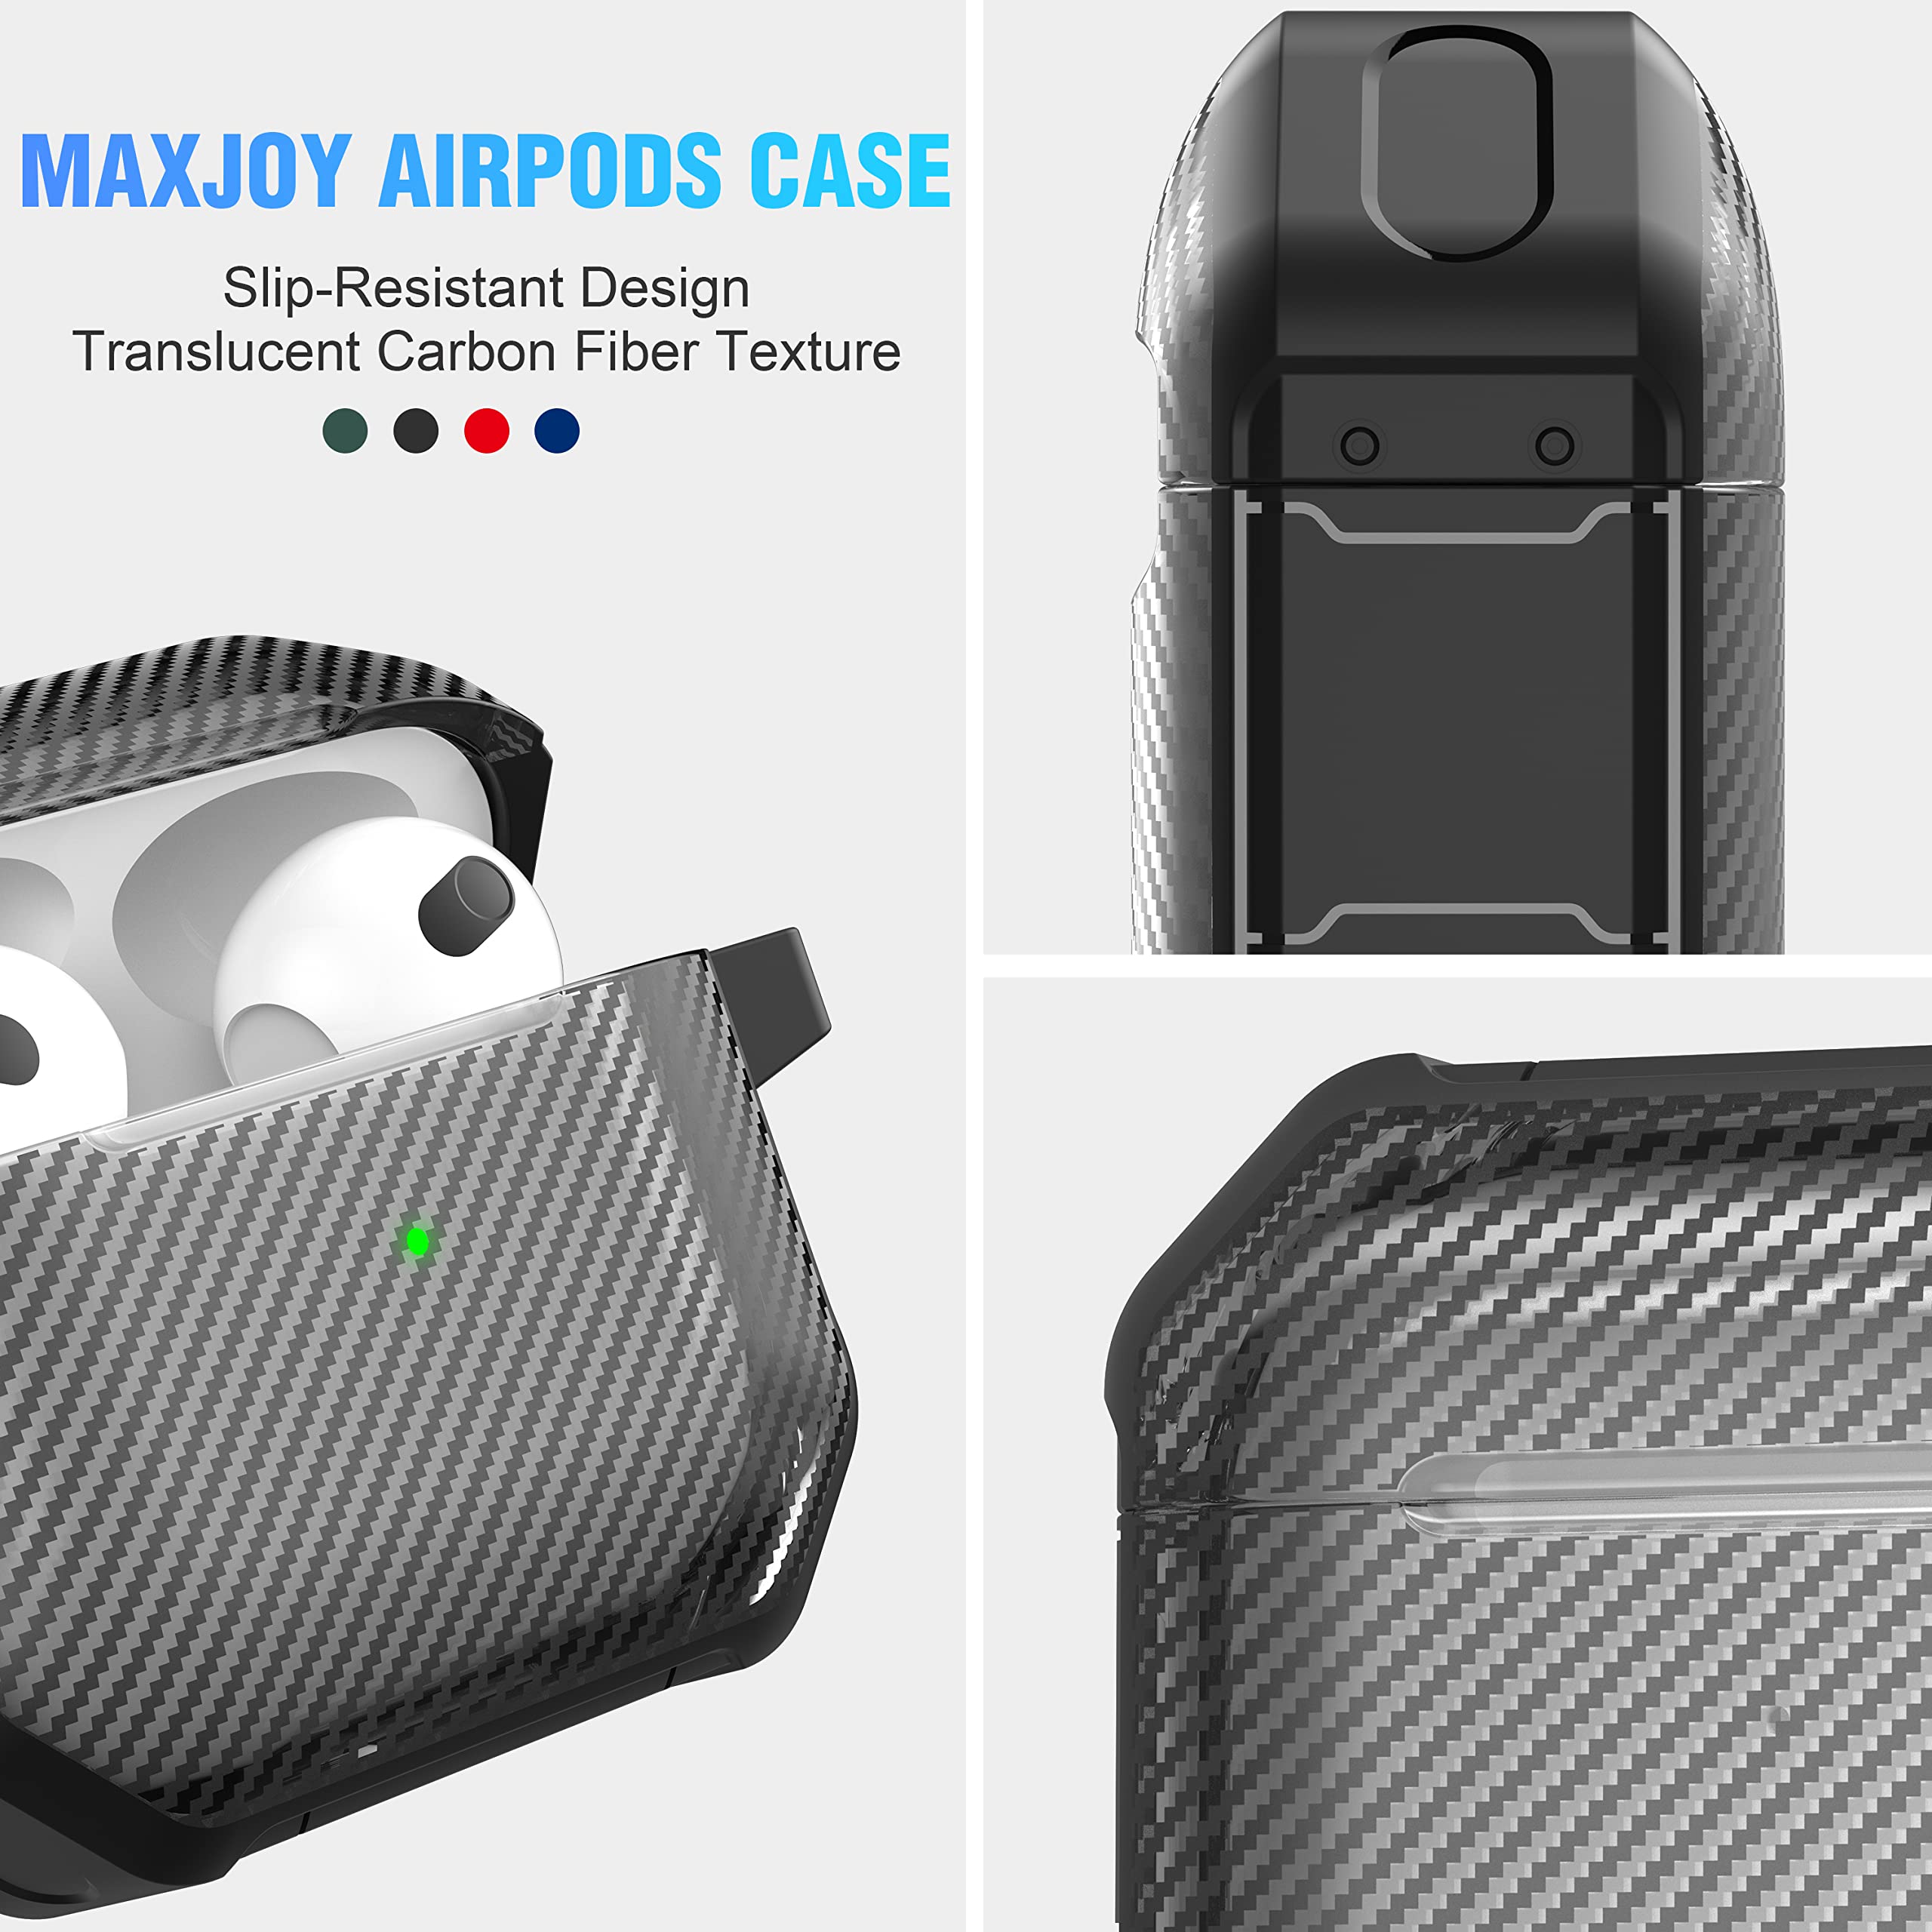 Maxjoy for Airpods 3 Case Cover, Airpods 3 Protective Case Gen 3 Translucent Carbon Fiber Hard Shell Rugged Shockproof Cover with Keychain Compatible with Apple Airpods 3rd Generation 2021, Black